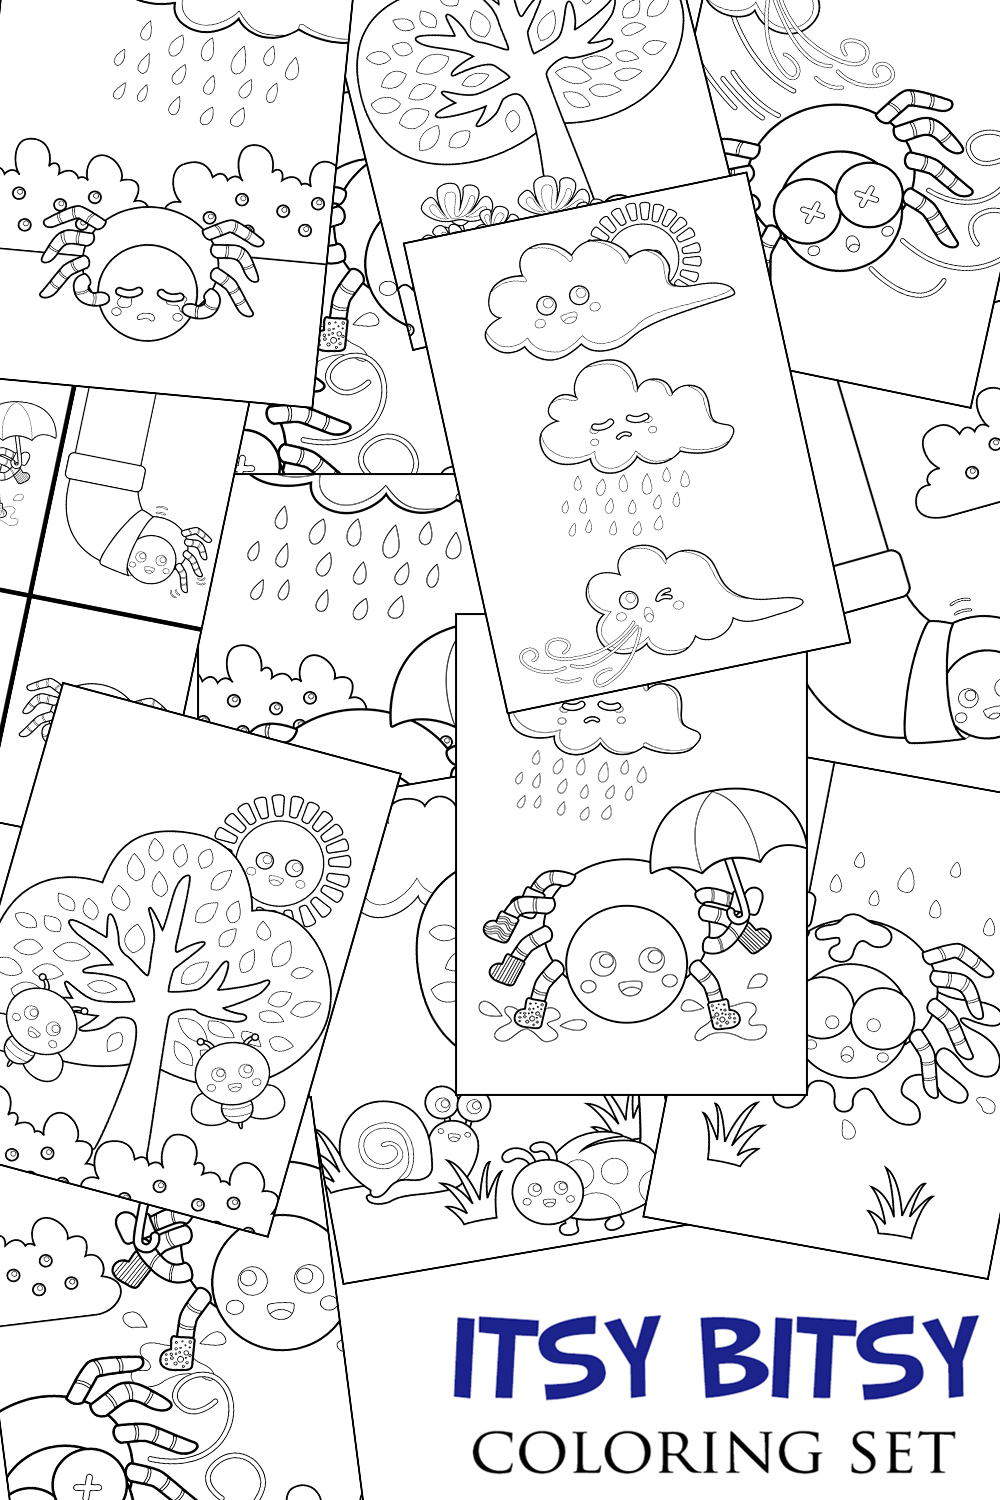 Itsy Bitsy Spider Kids Bedtime Story Classic Rhymes Coloring Pages Activity For Kids And Adult pinterest preview image.